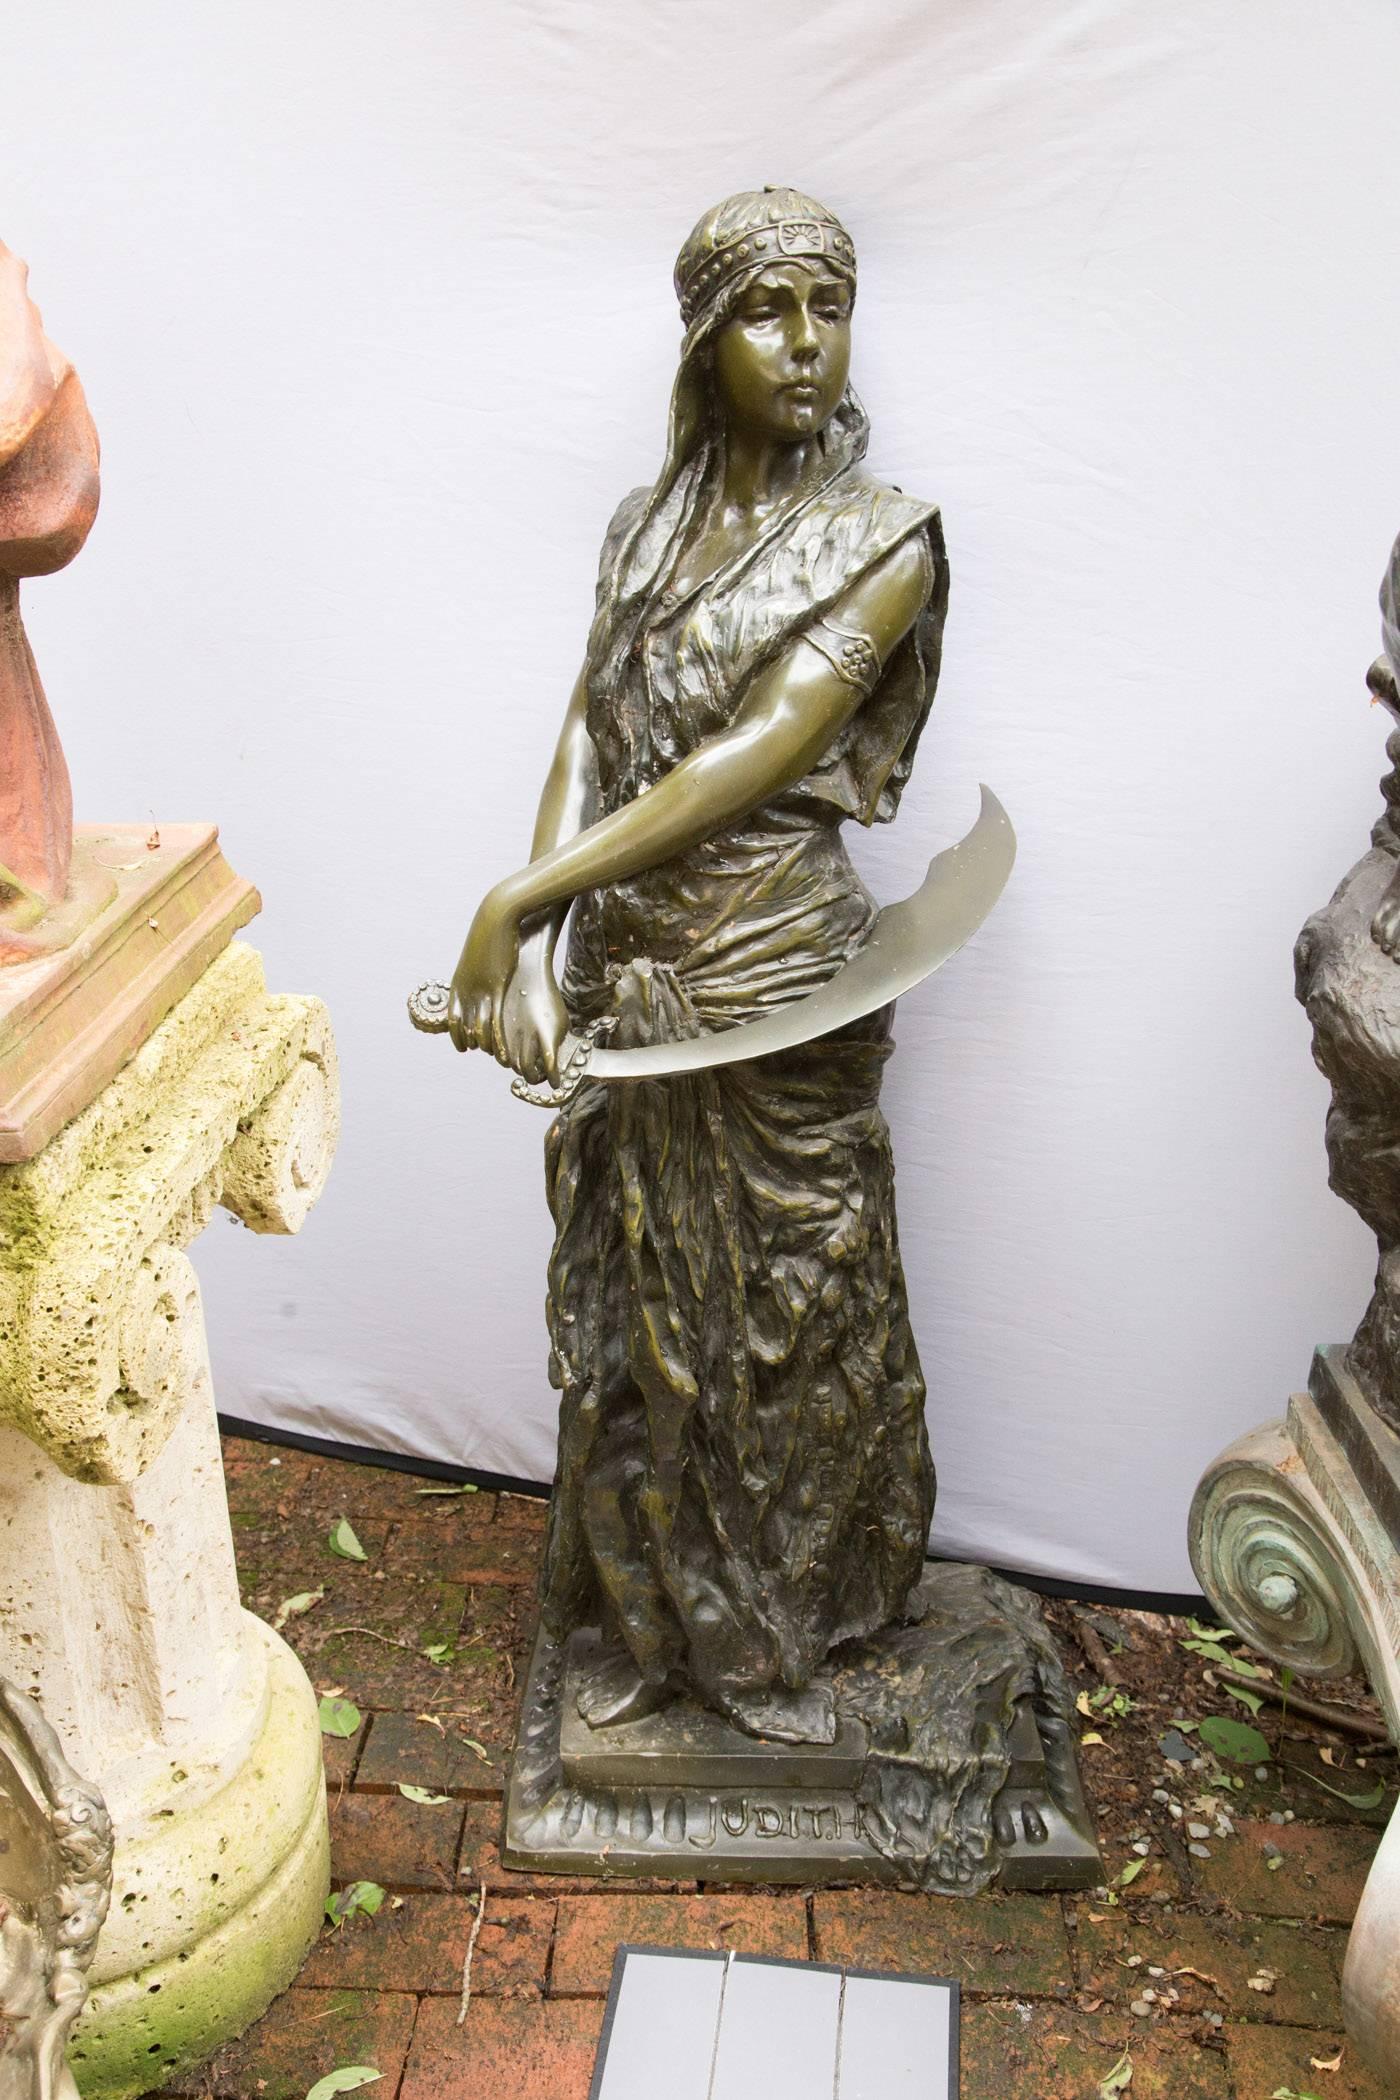 Judith stands upon an integral base, she wears a cloche type hat and carries a simitar in her right hand.
Base has the signature E. Villanis (Emmanuel Villanis 1858-1914)
This is a reproduction of his work, cast in the late 20th century. Foundry